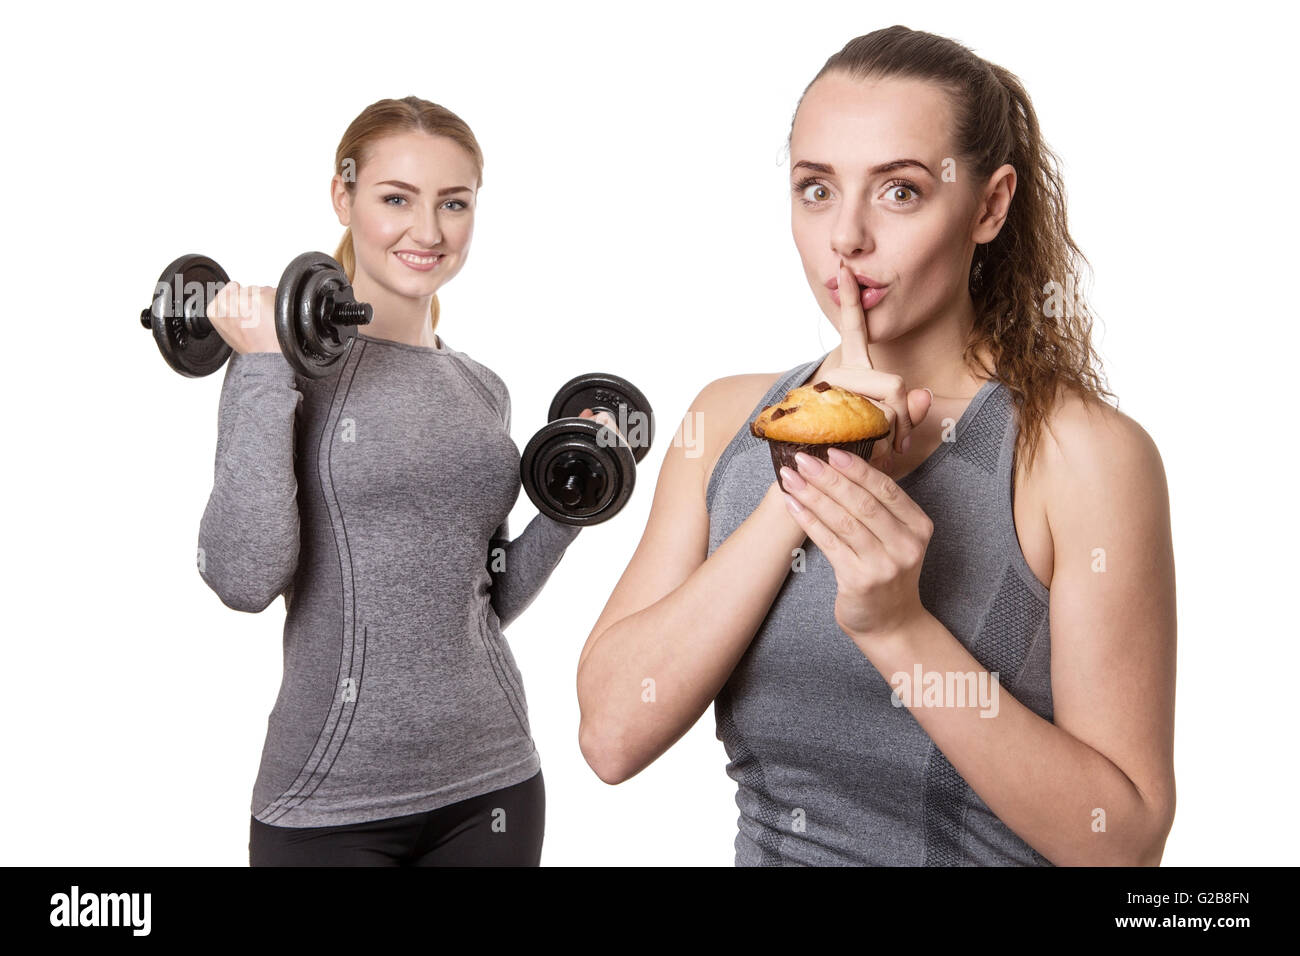 Two Sporty Women Holding Muffin And Dumbbells On White Background Stock Photo